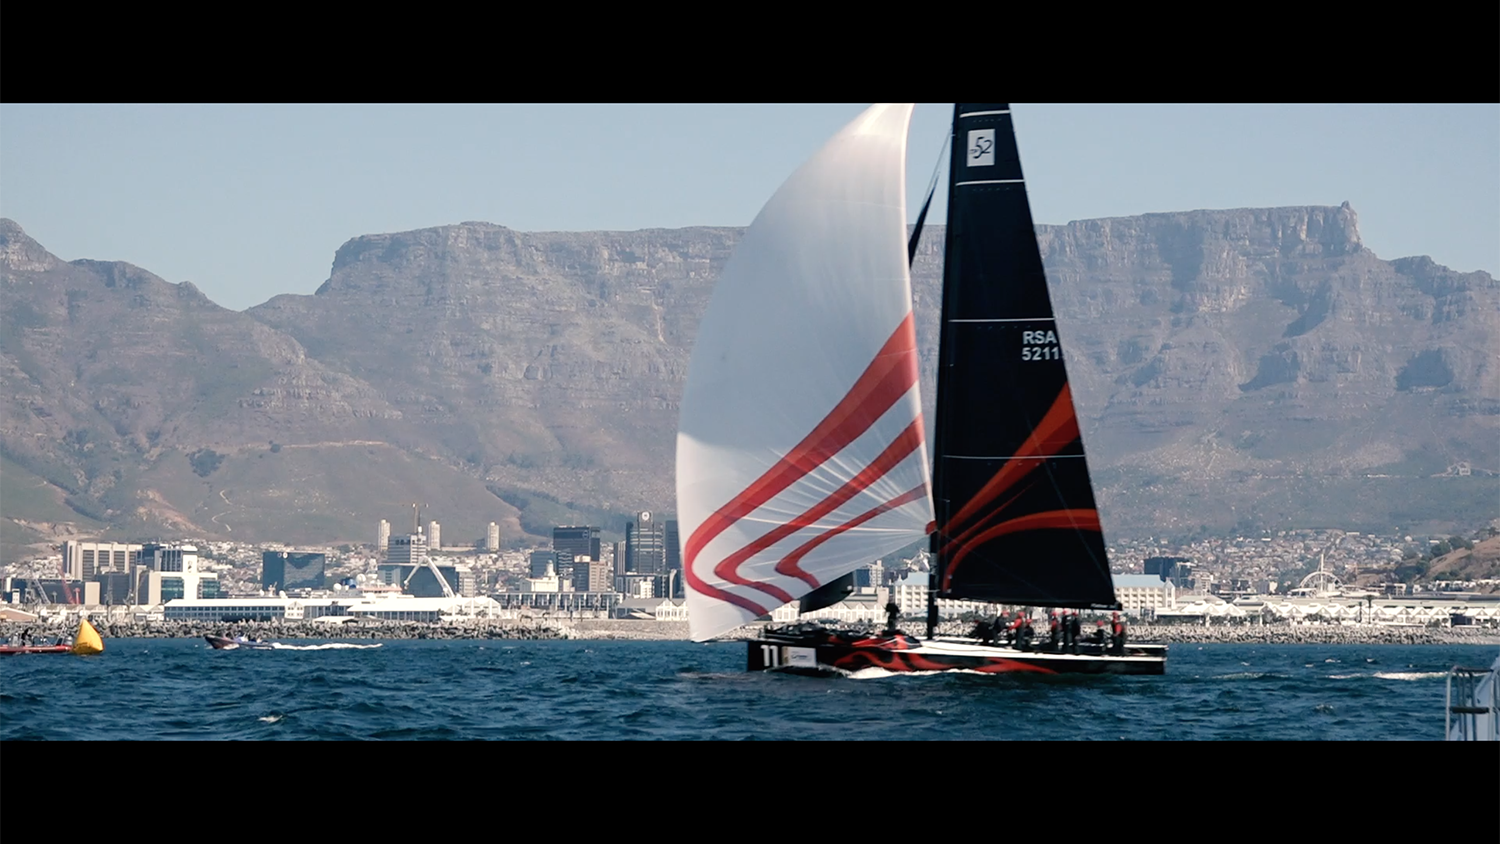 Day 1 – Odzala Discovery Camps 52 SUPER SERIES V&A Waterfront – Cape Town